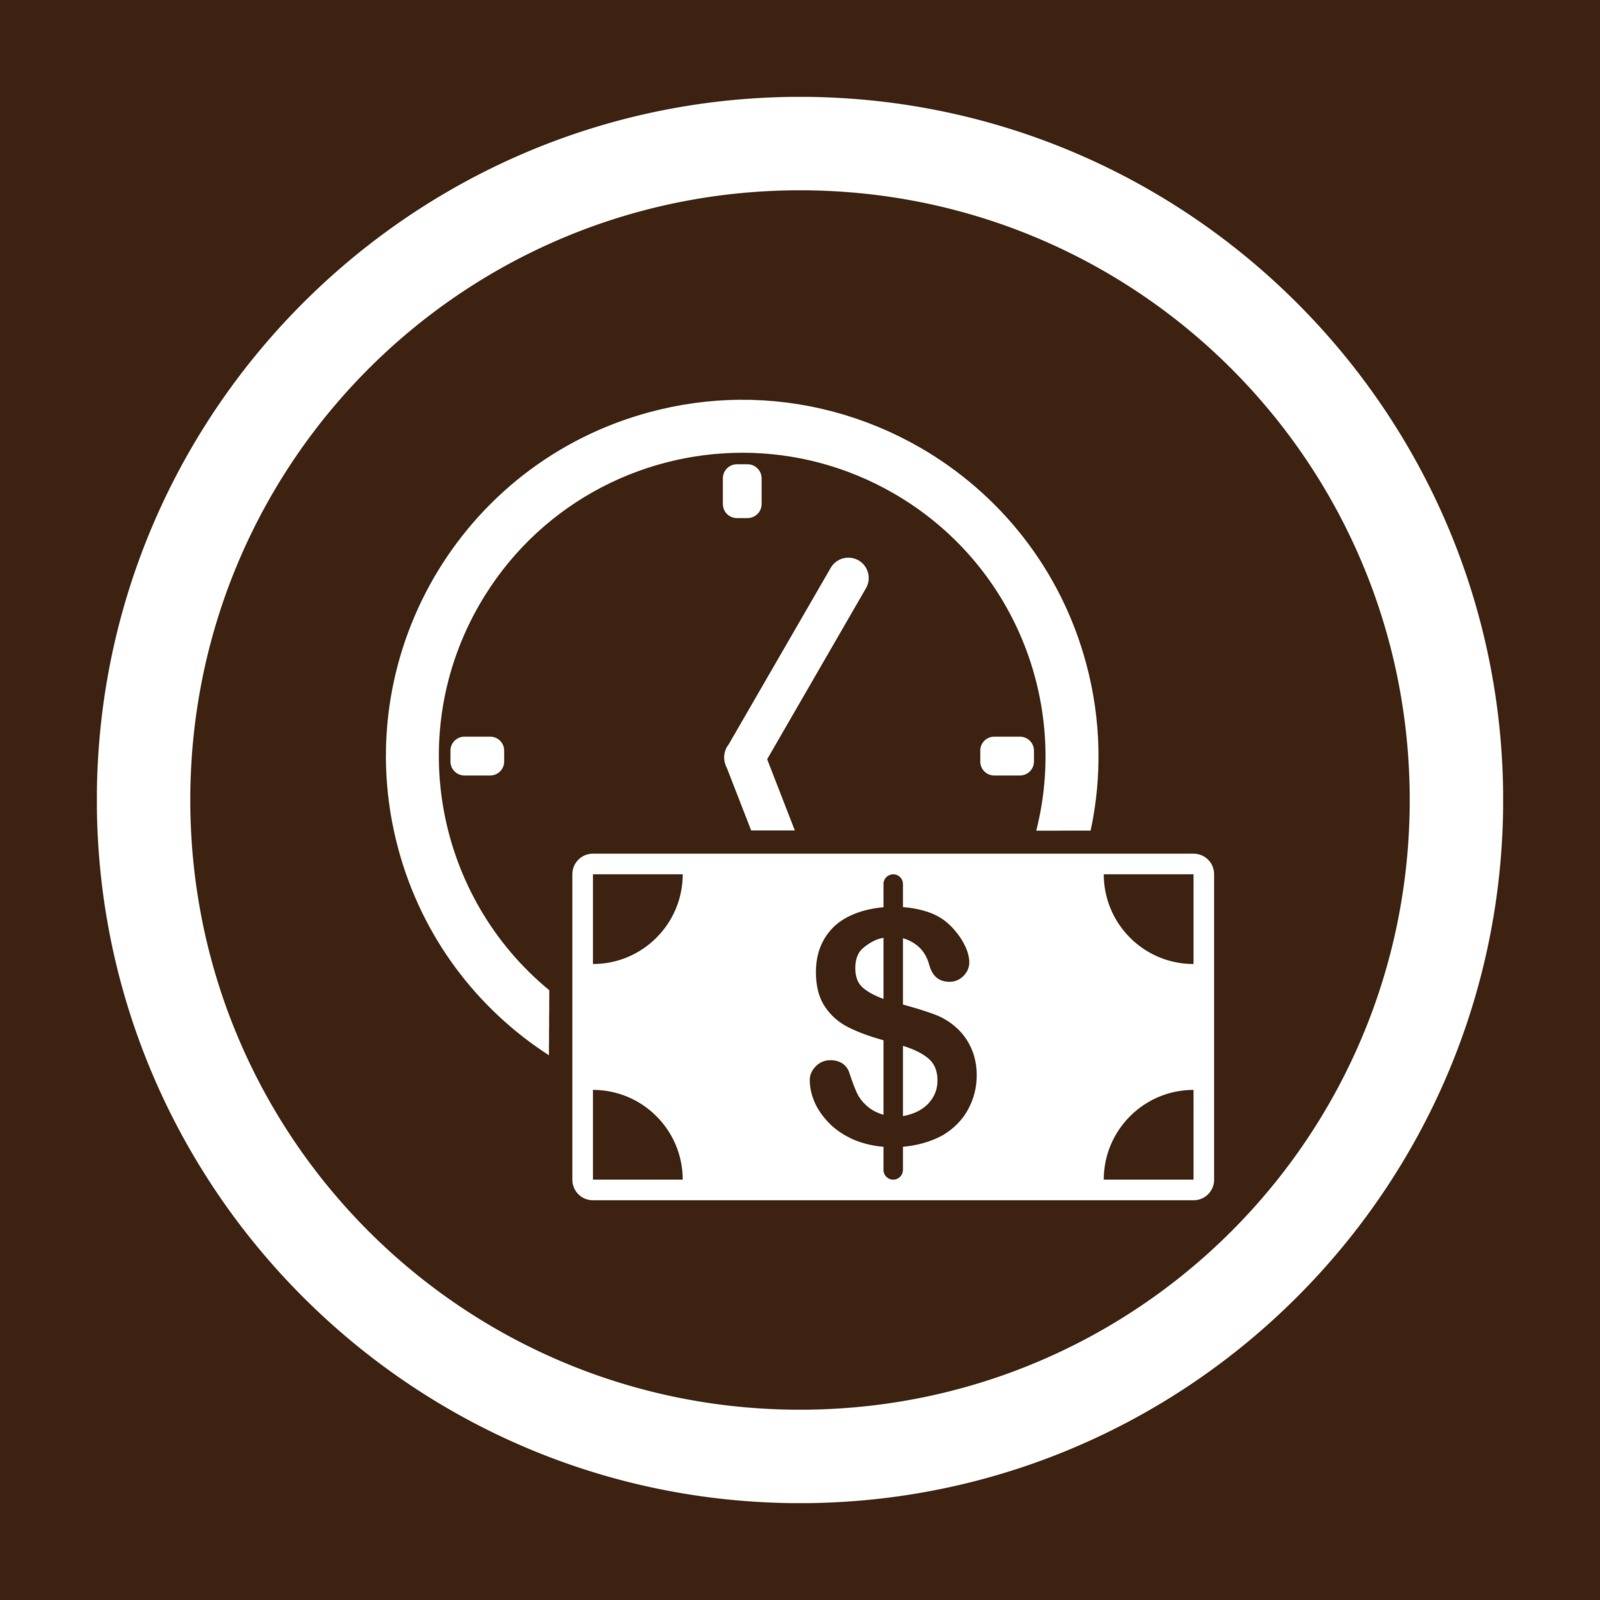 Credit vector icon. This flat rounded symbol uses white color and isolated on a brown background.